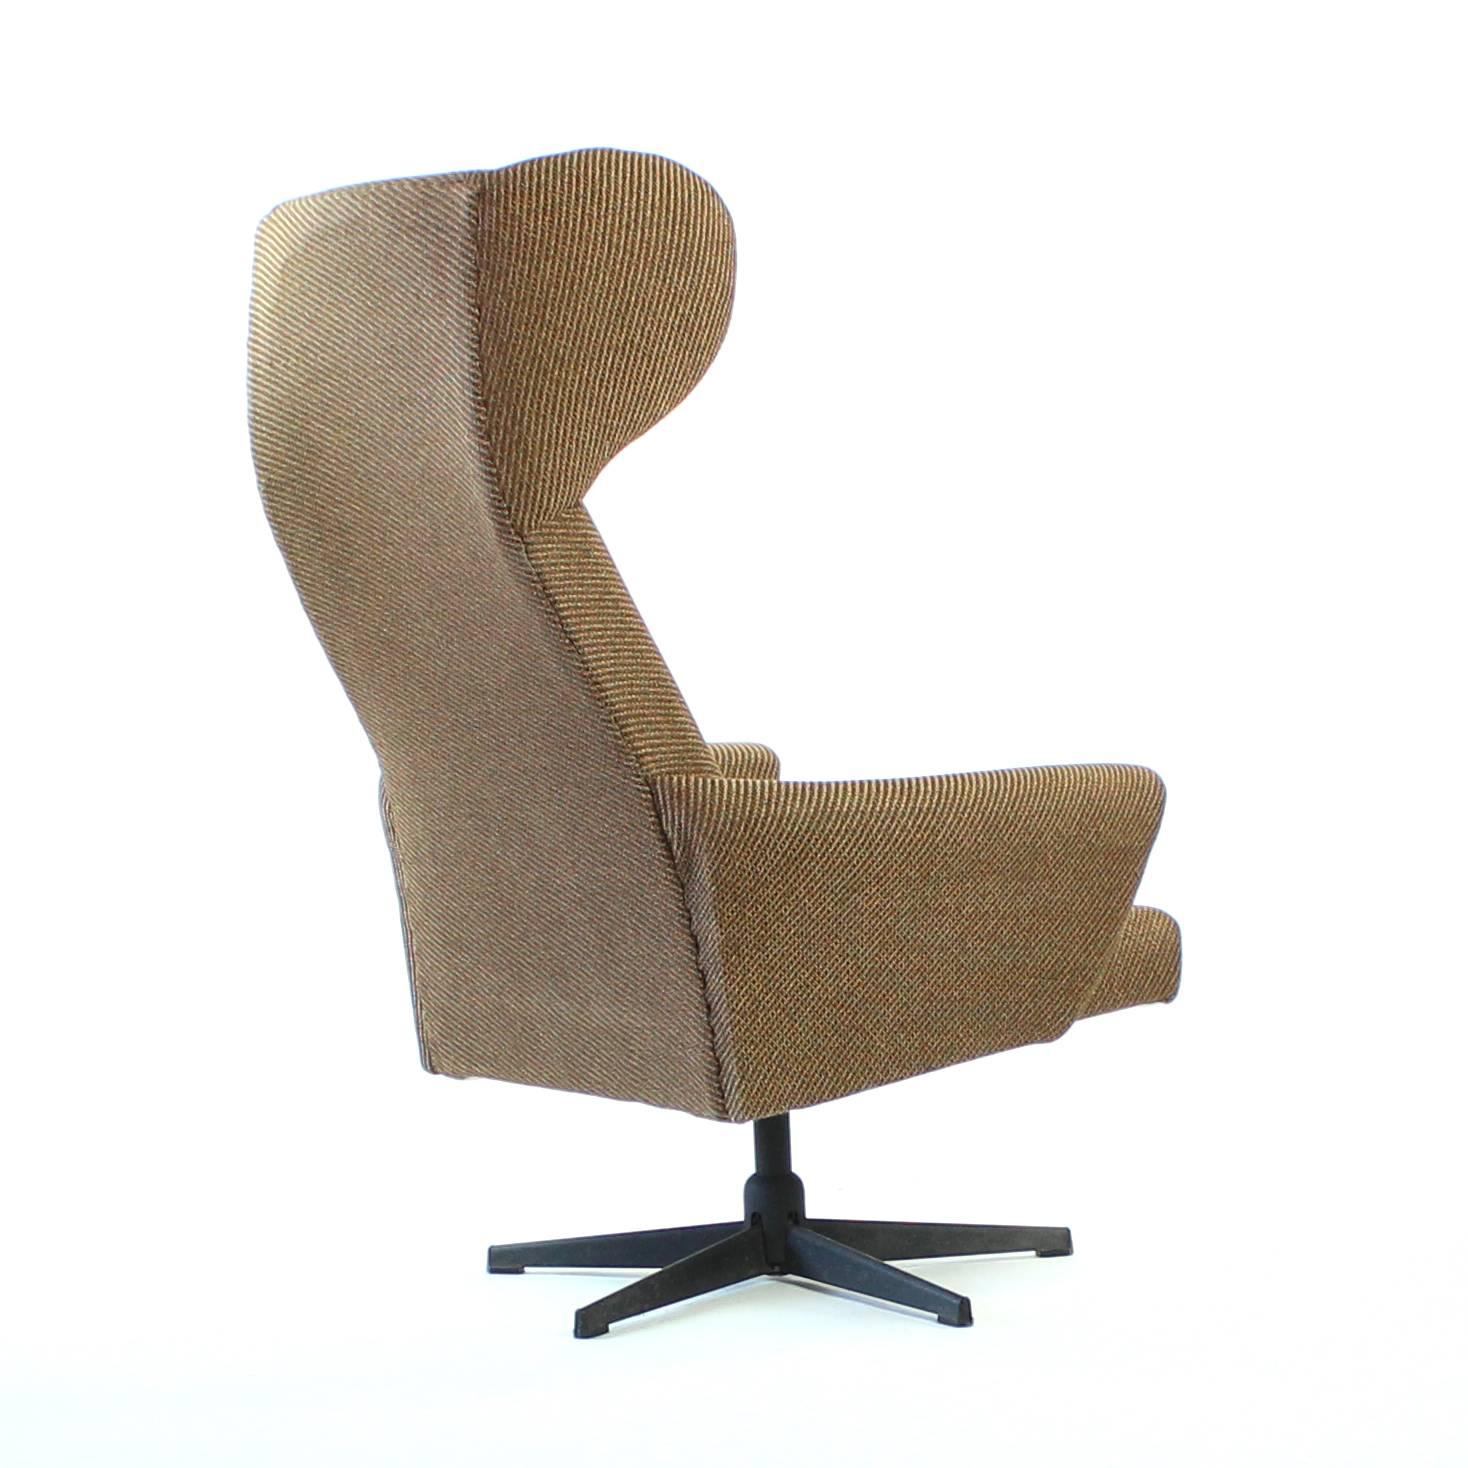 1970s Swivel Wing Chair in Original Brown Fabric, Czechoslovakia For Sale 1